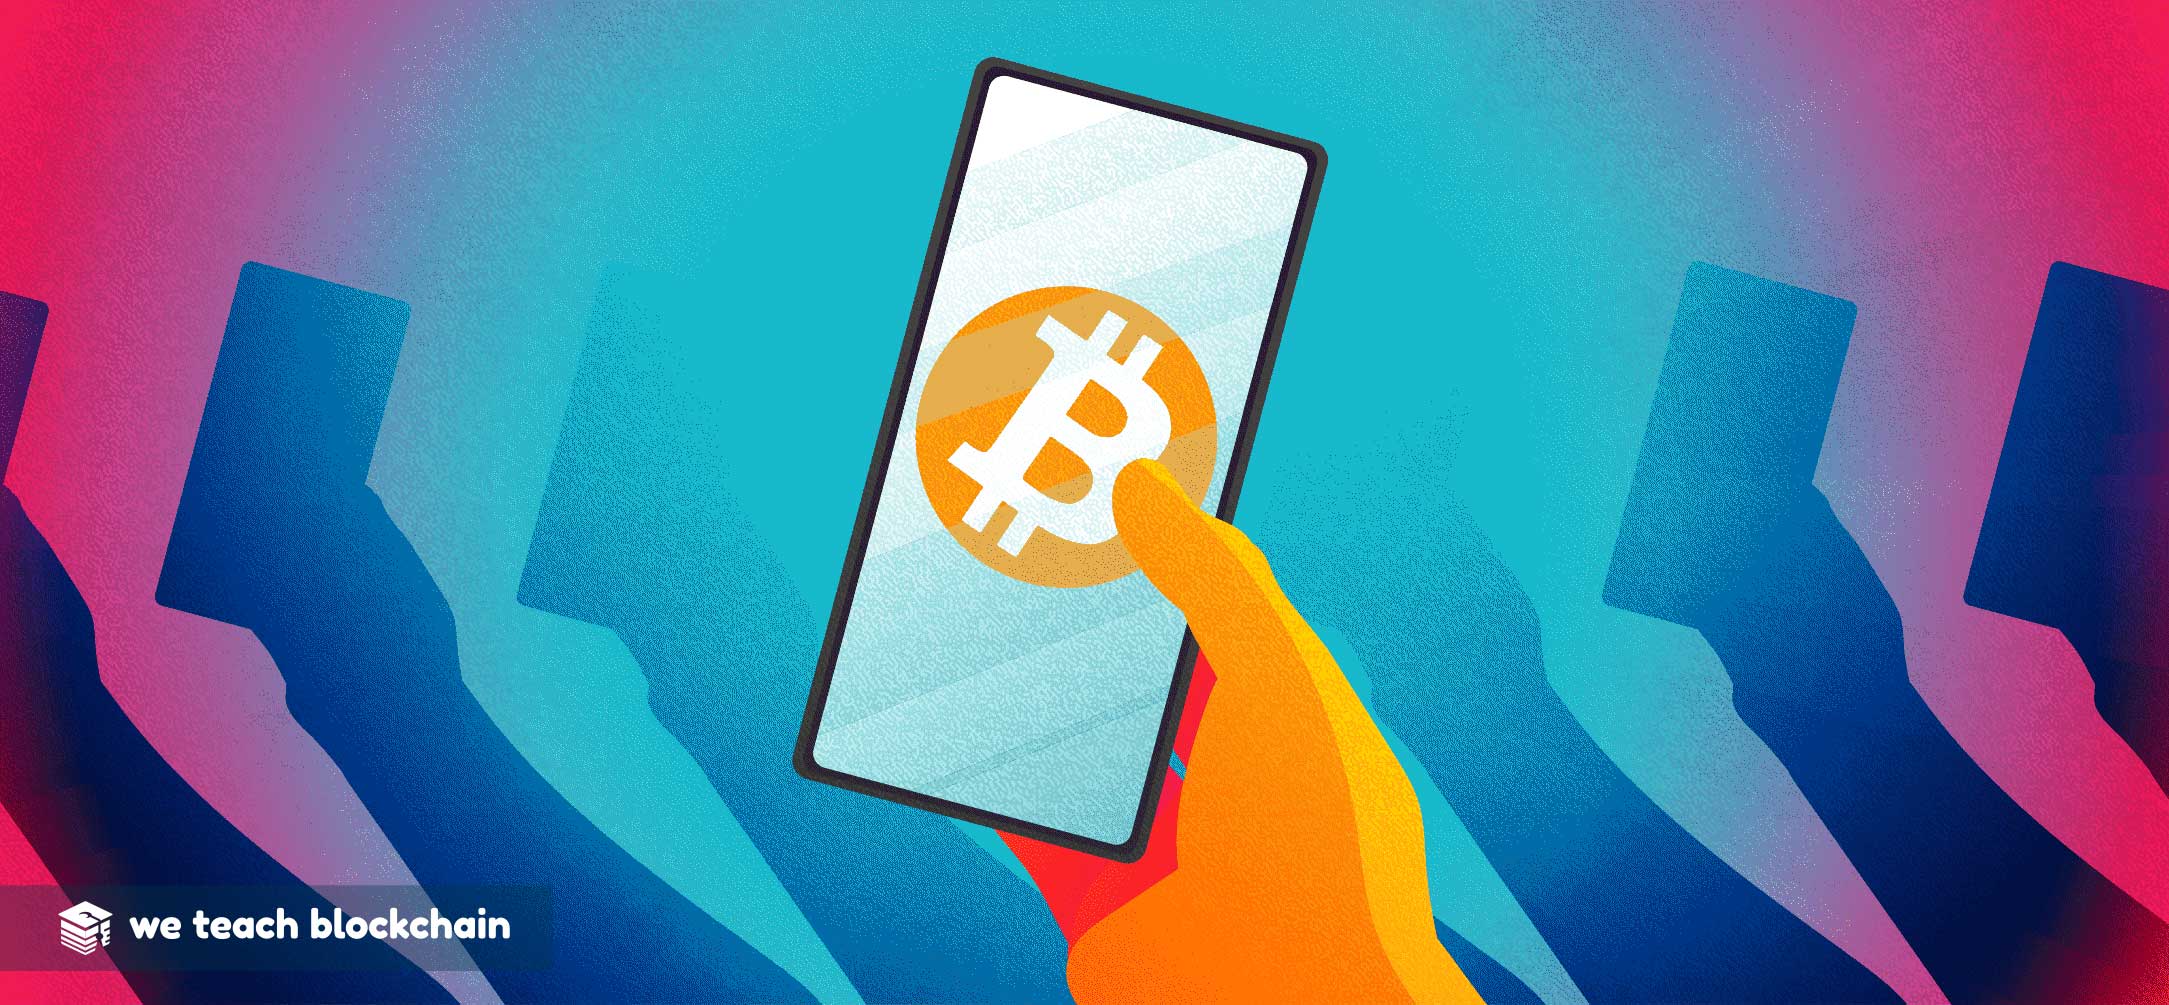 A hand holding a phone with a Bitcoin logo on the screen